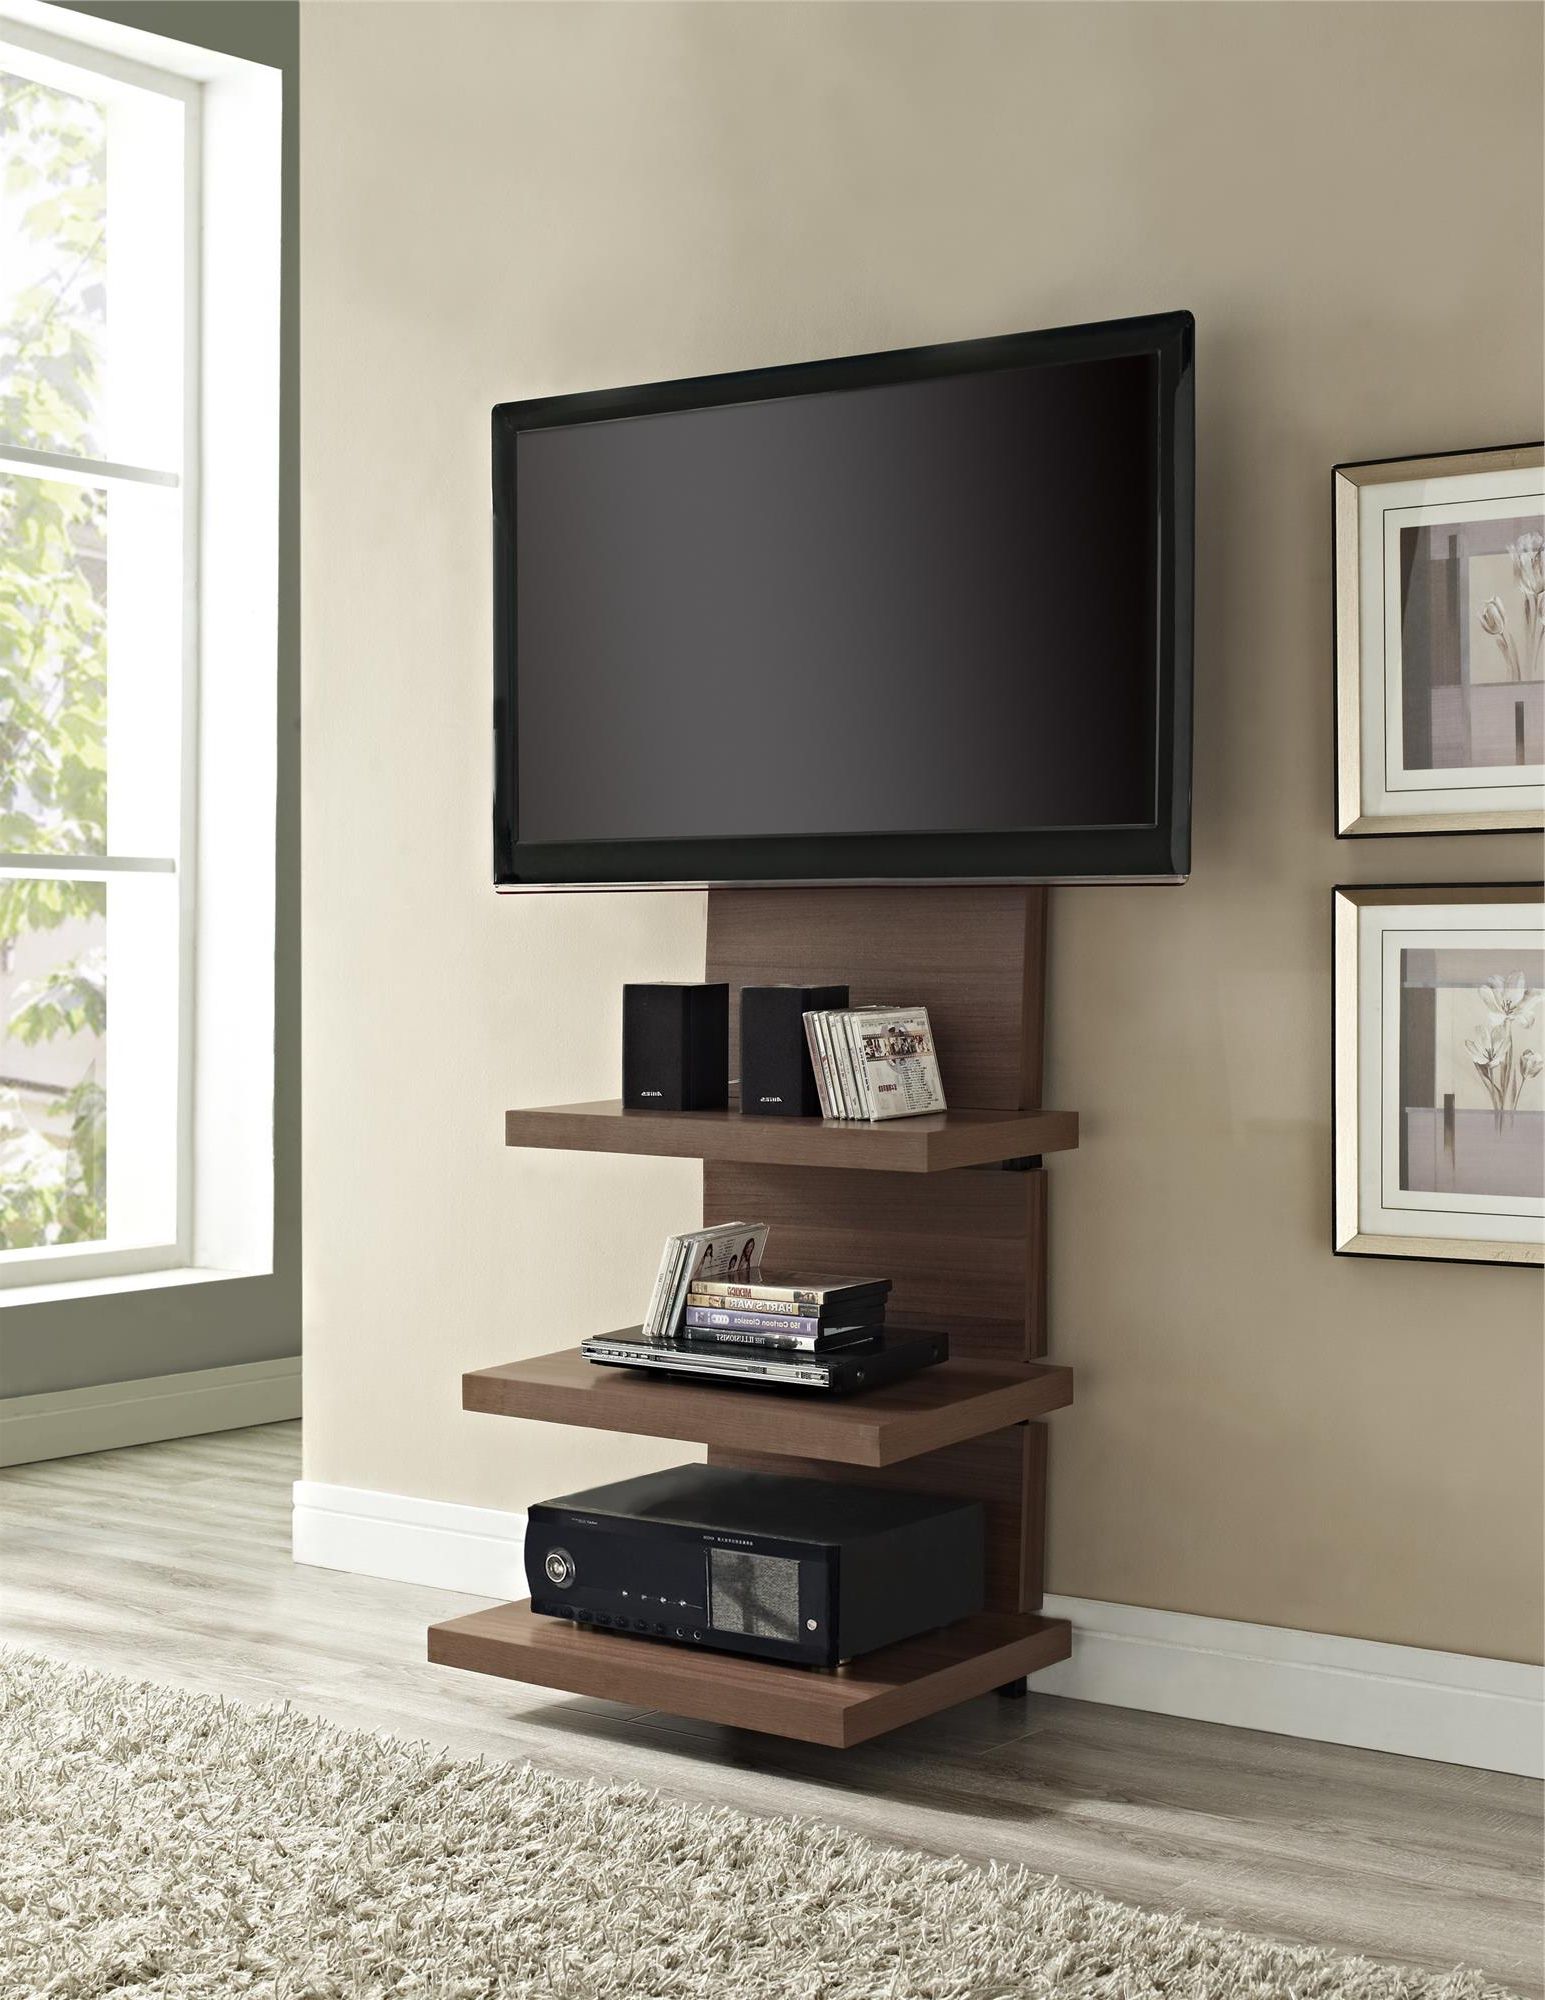 Most Recently Released Big Tv Stand Wood Stands Recommendation Homesfeed Wooden Brown On In Wood Tv Floor Stands (View 1 of 20)